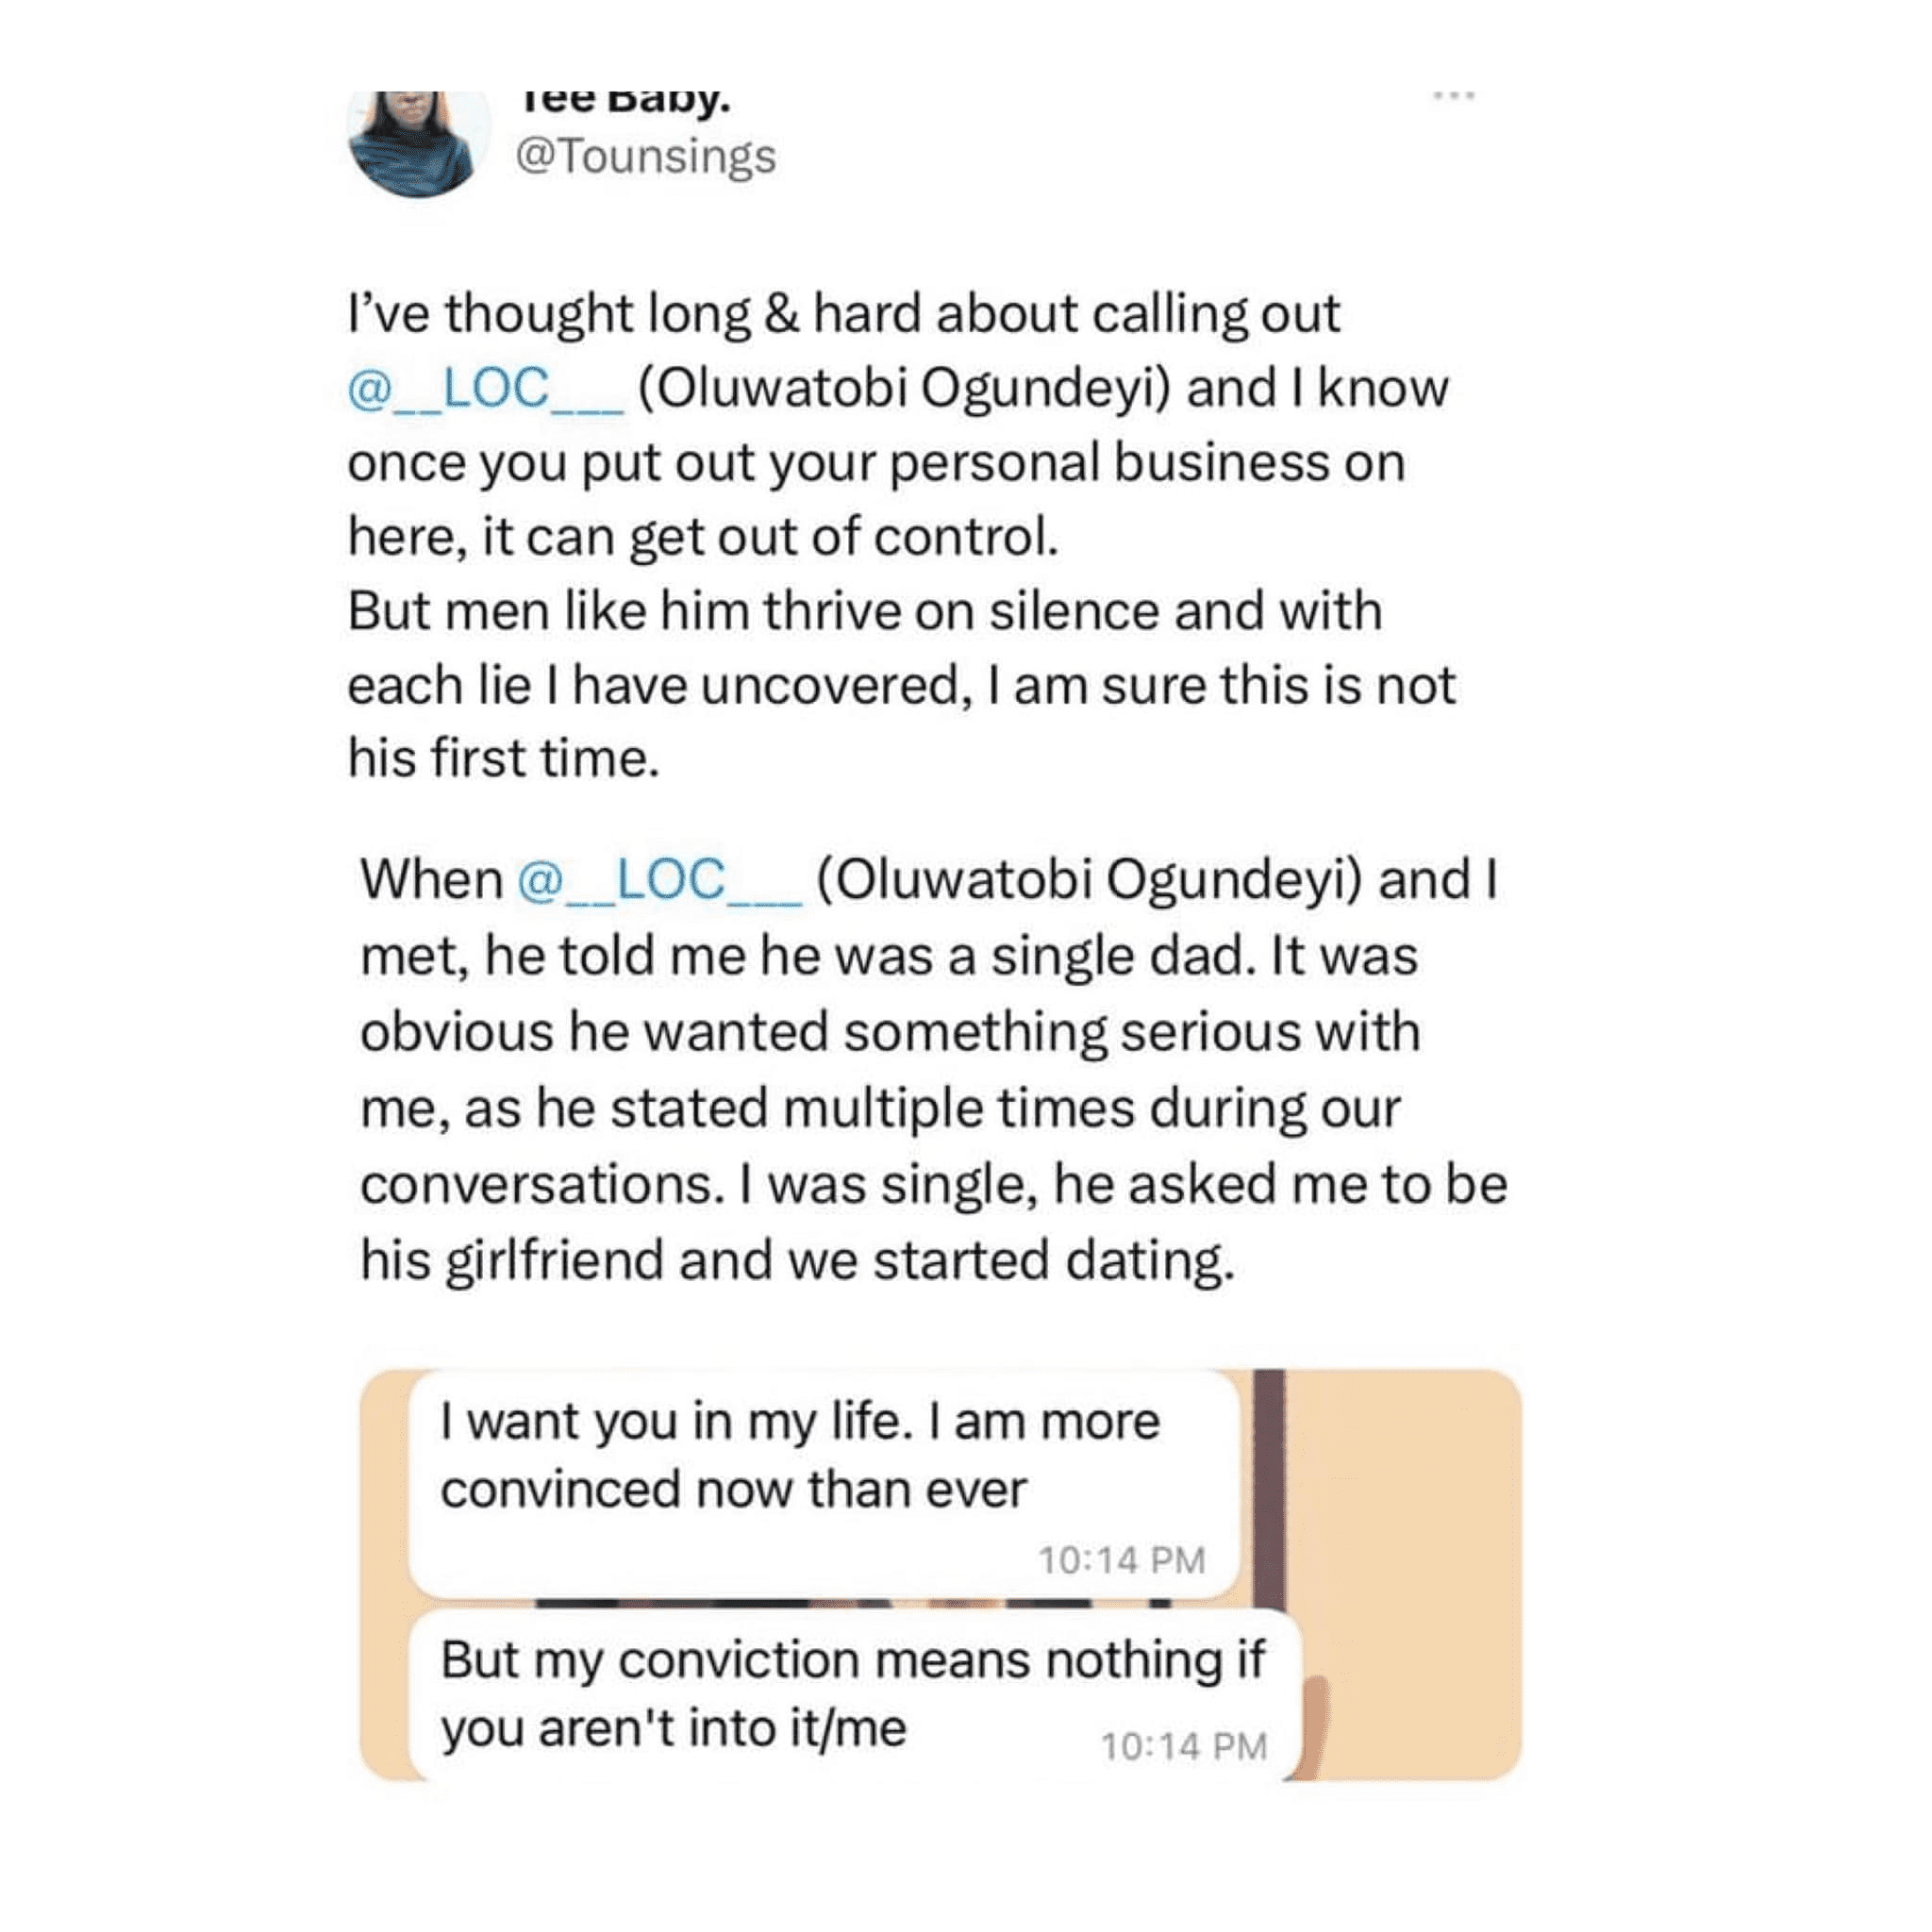 Nigerian Woman Exposes Married Man for Deceiving Her into a Relationship and Allegedly Issuing Death Threats Upon Confrontation